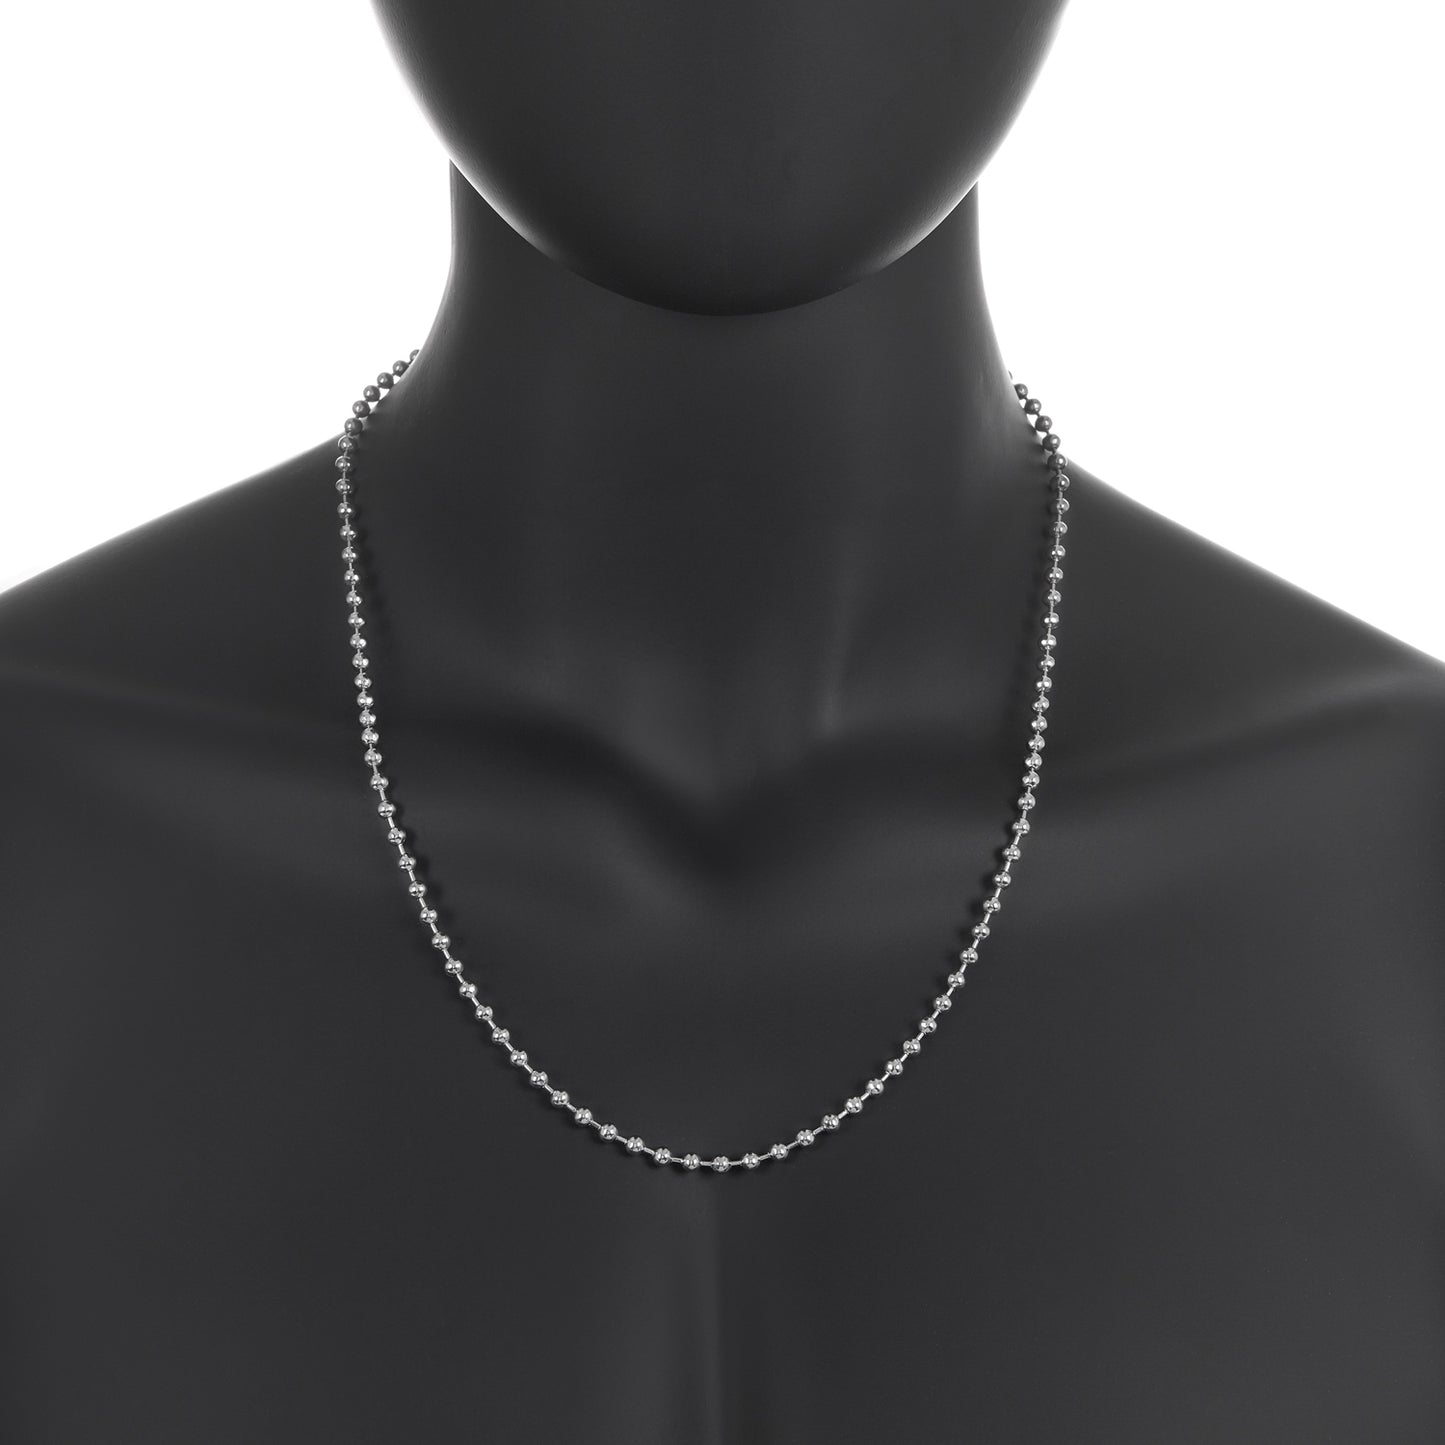 4mm High-Polished Stainless Steel Ball Military Necklace (SKU: ST-BAL400)